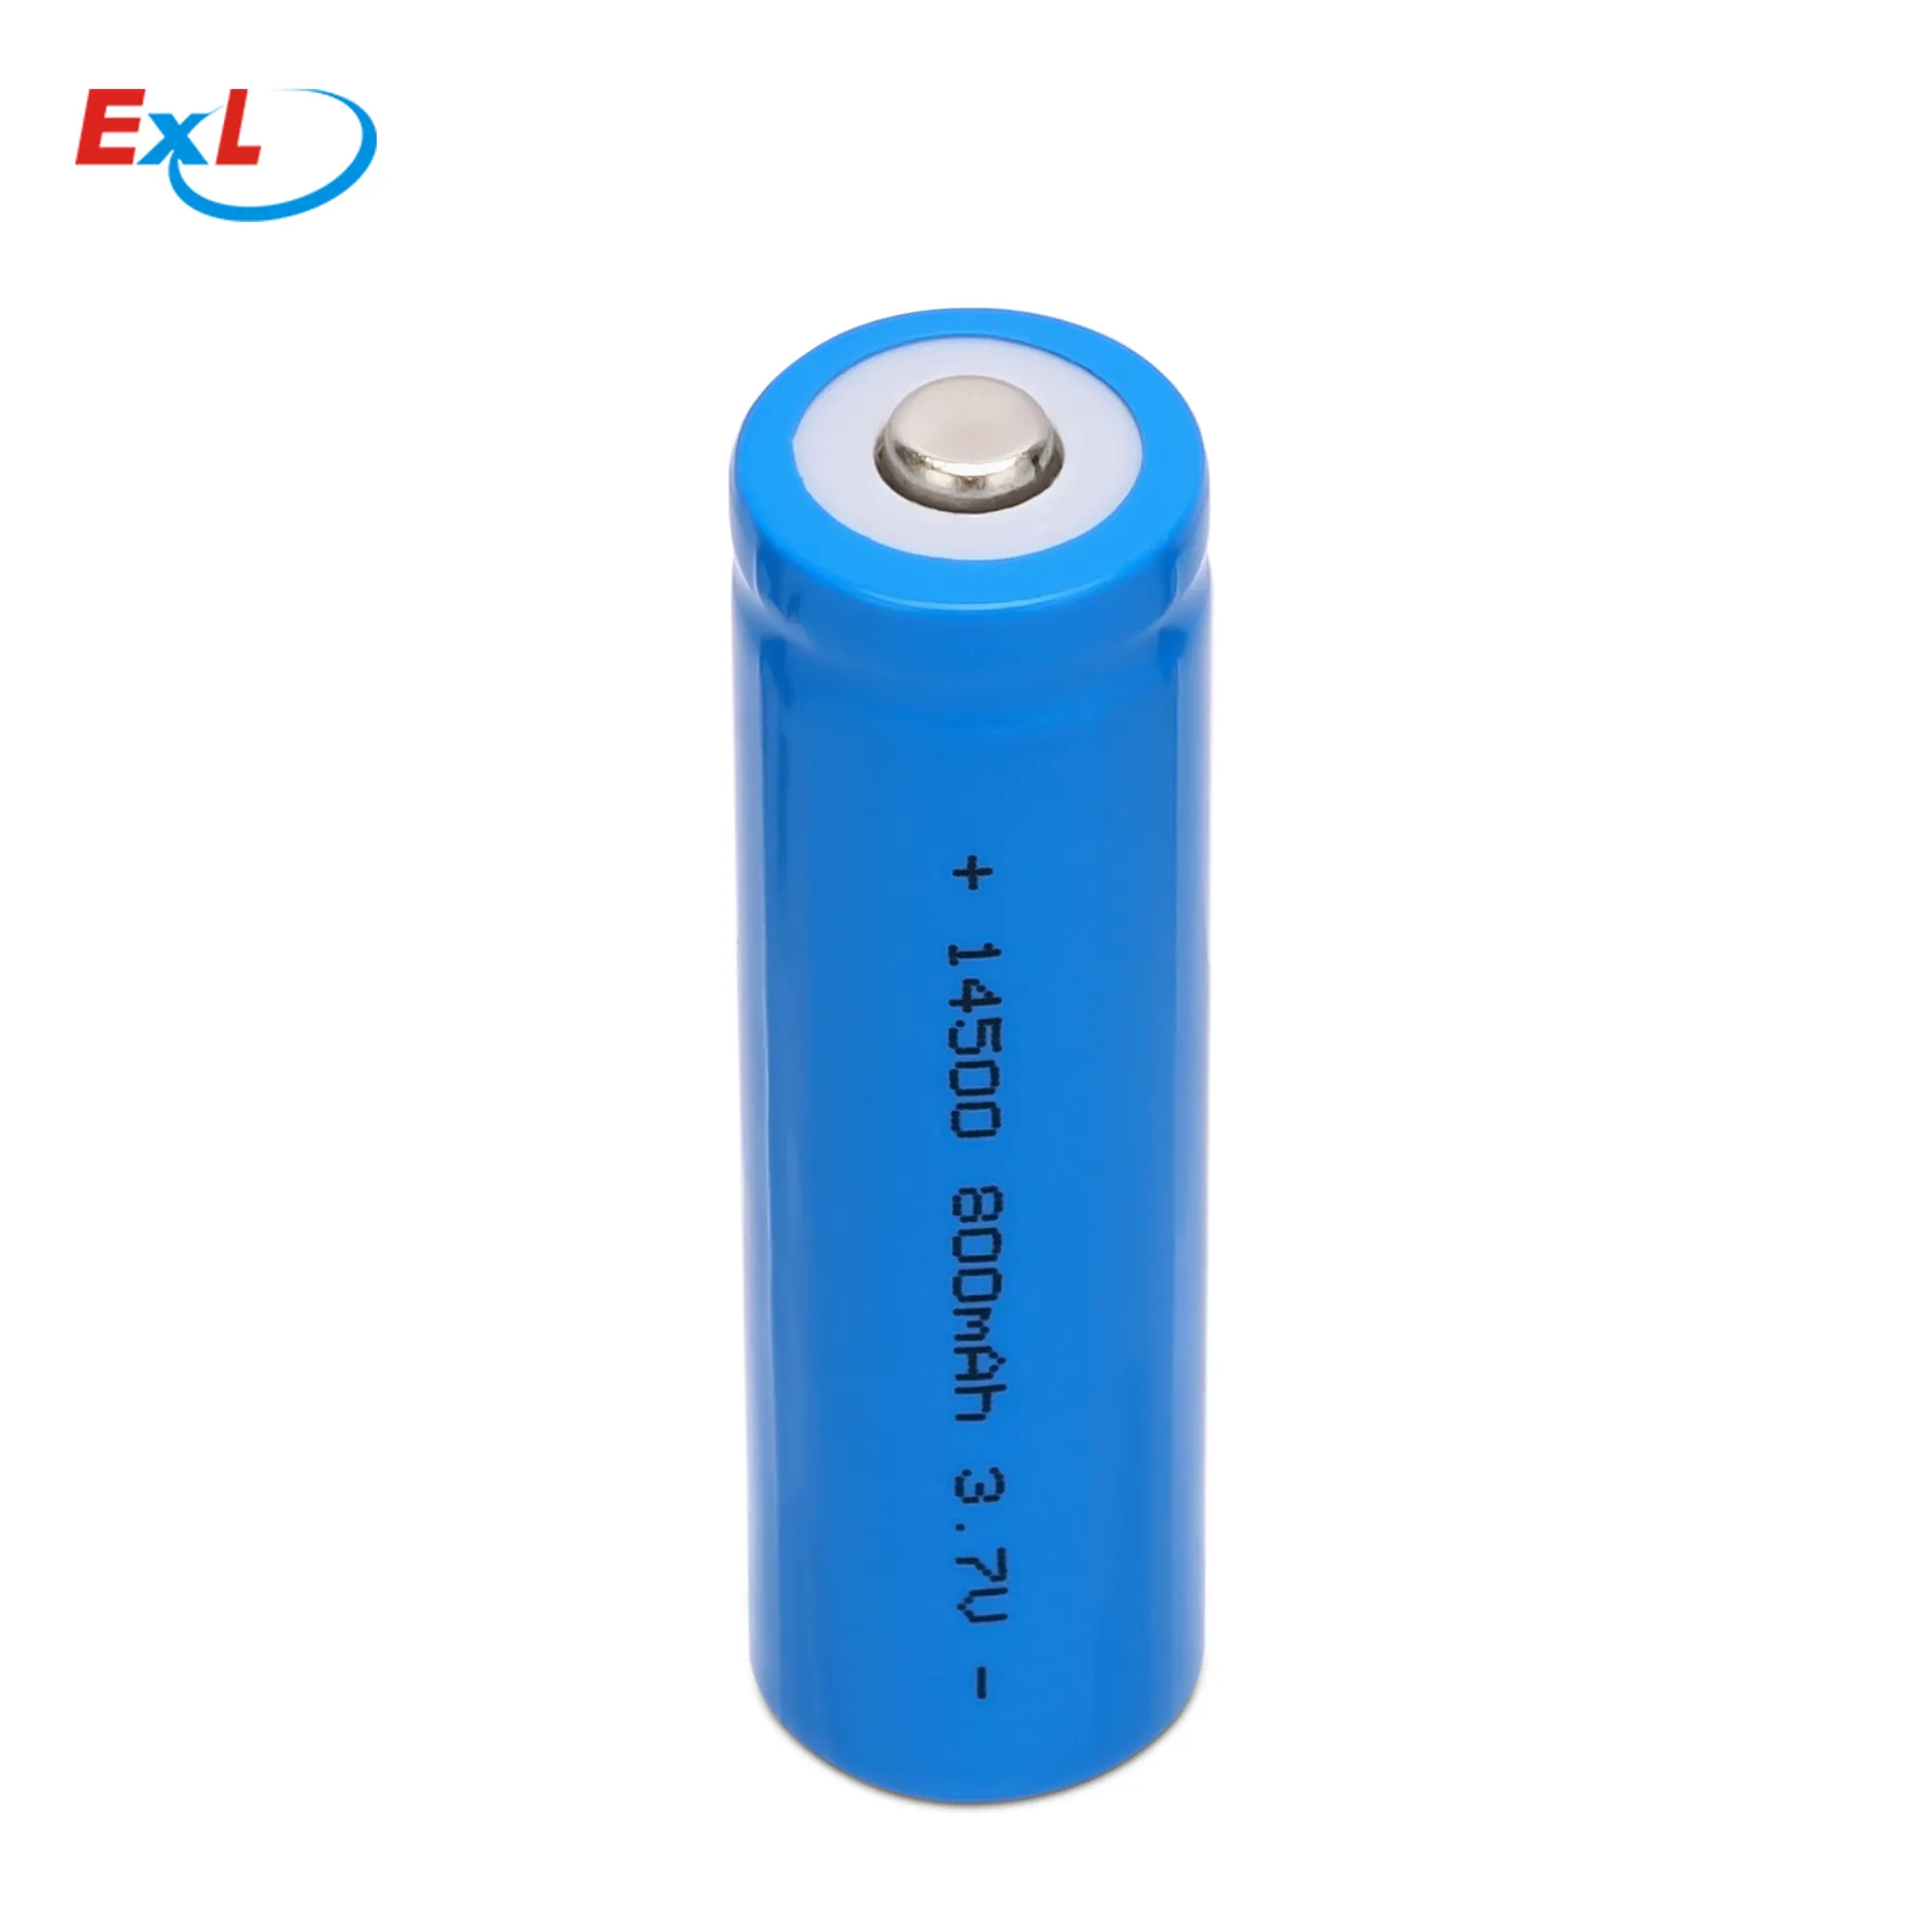 OEM ODM long cycle life 14500 Li ion pointed batteries 700mAh 3.7V rechargeable battery cell